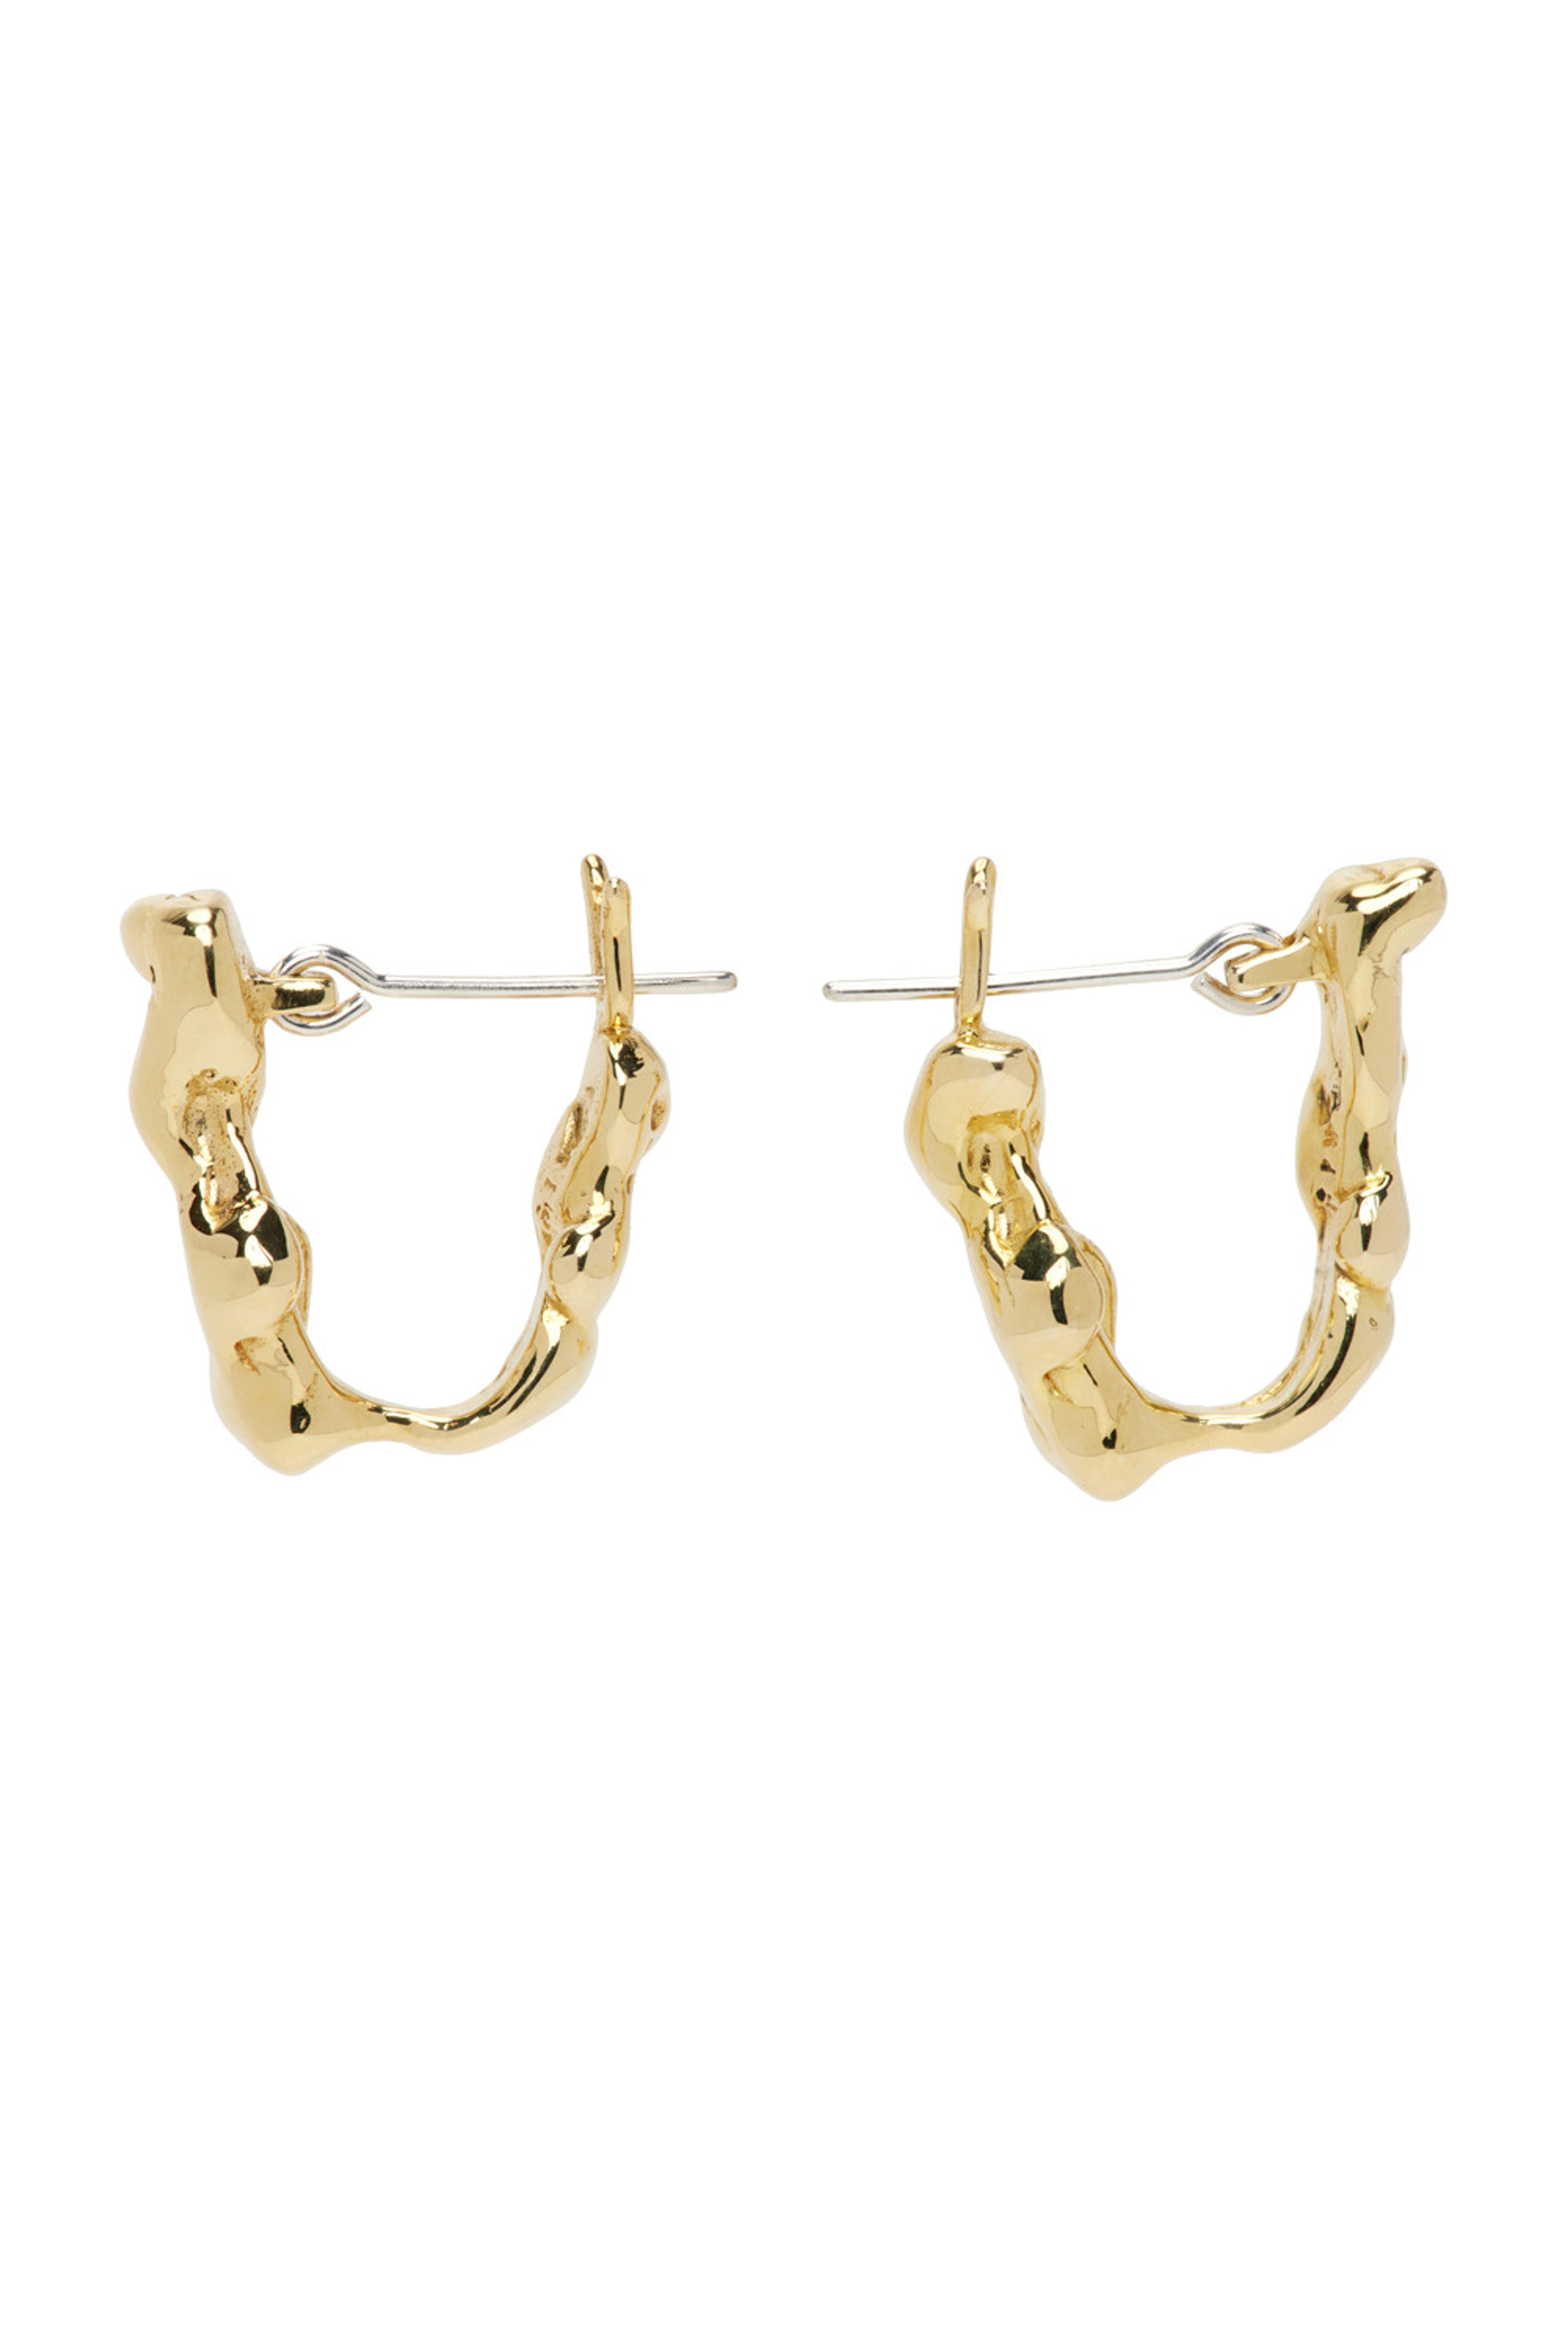 Gold Lava Link Hoops by FARIS on Sale